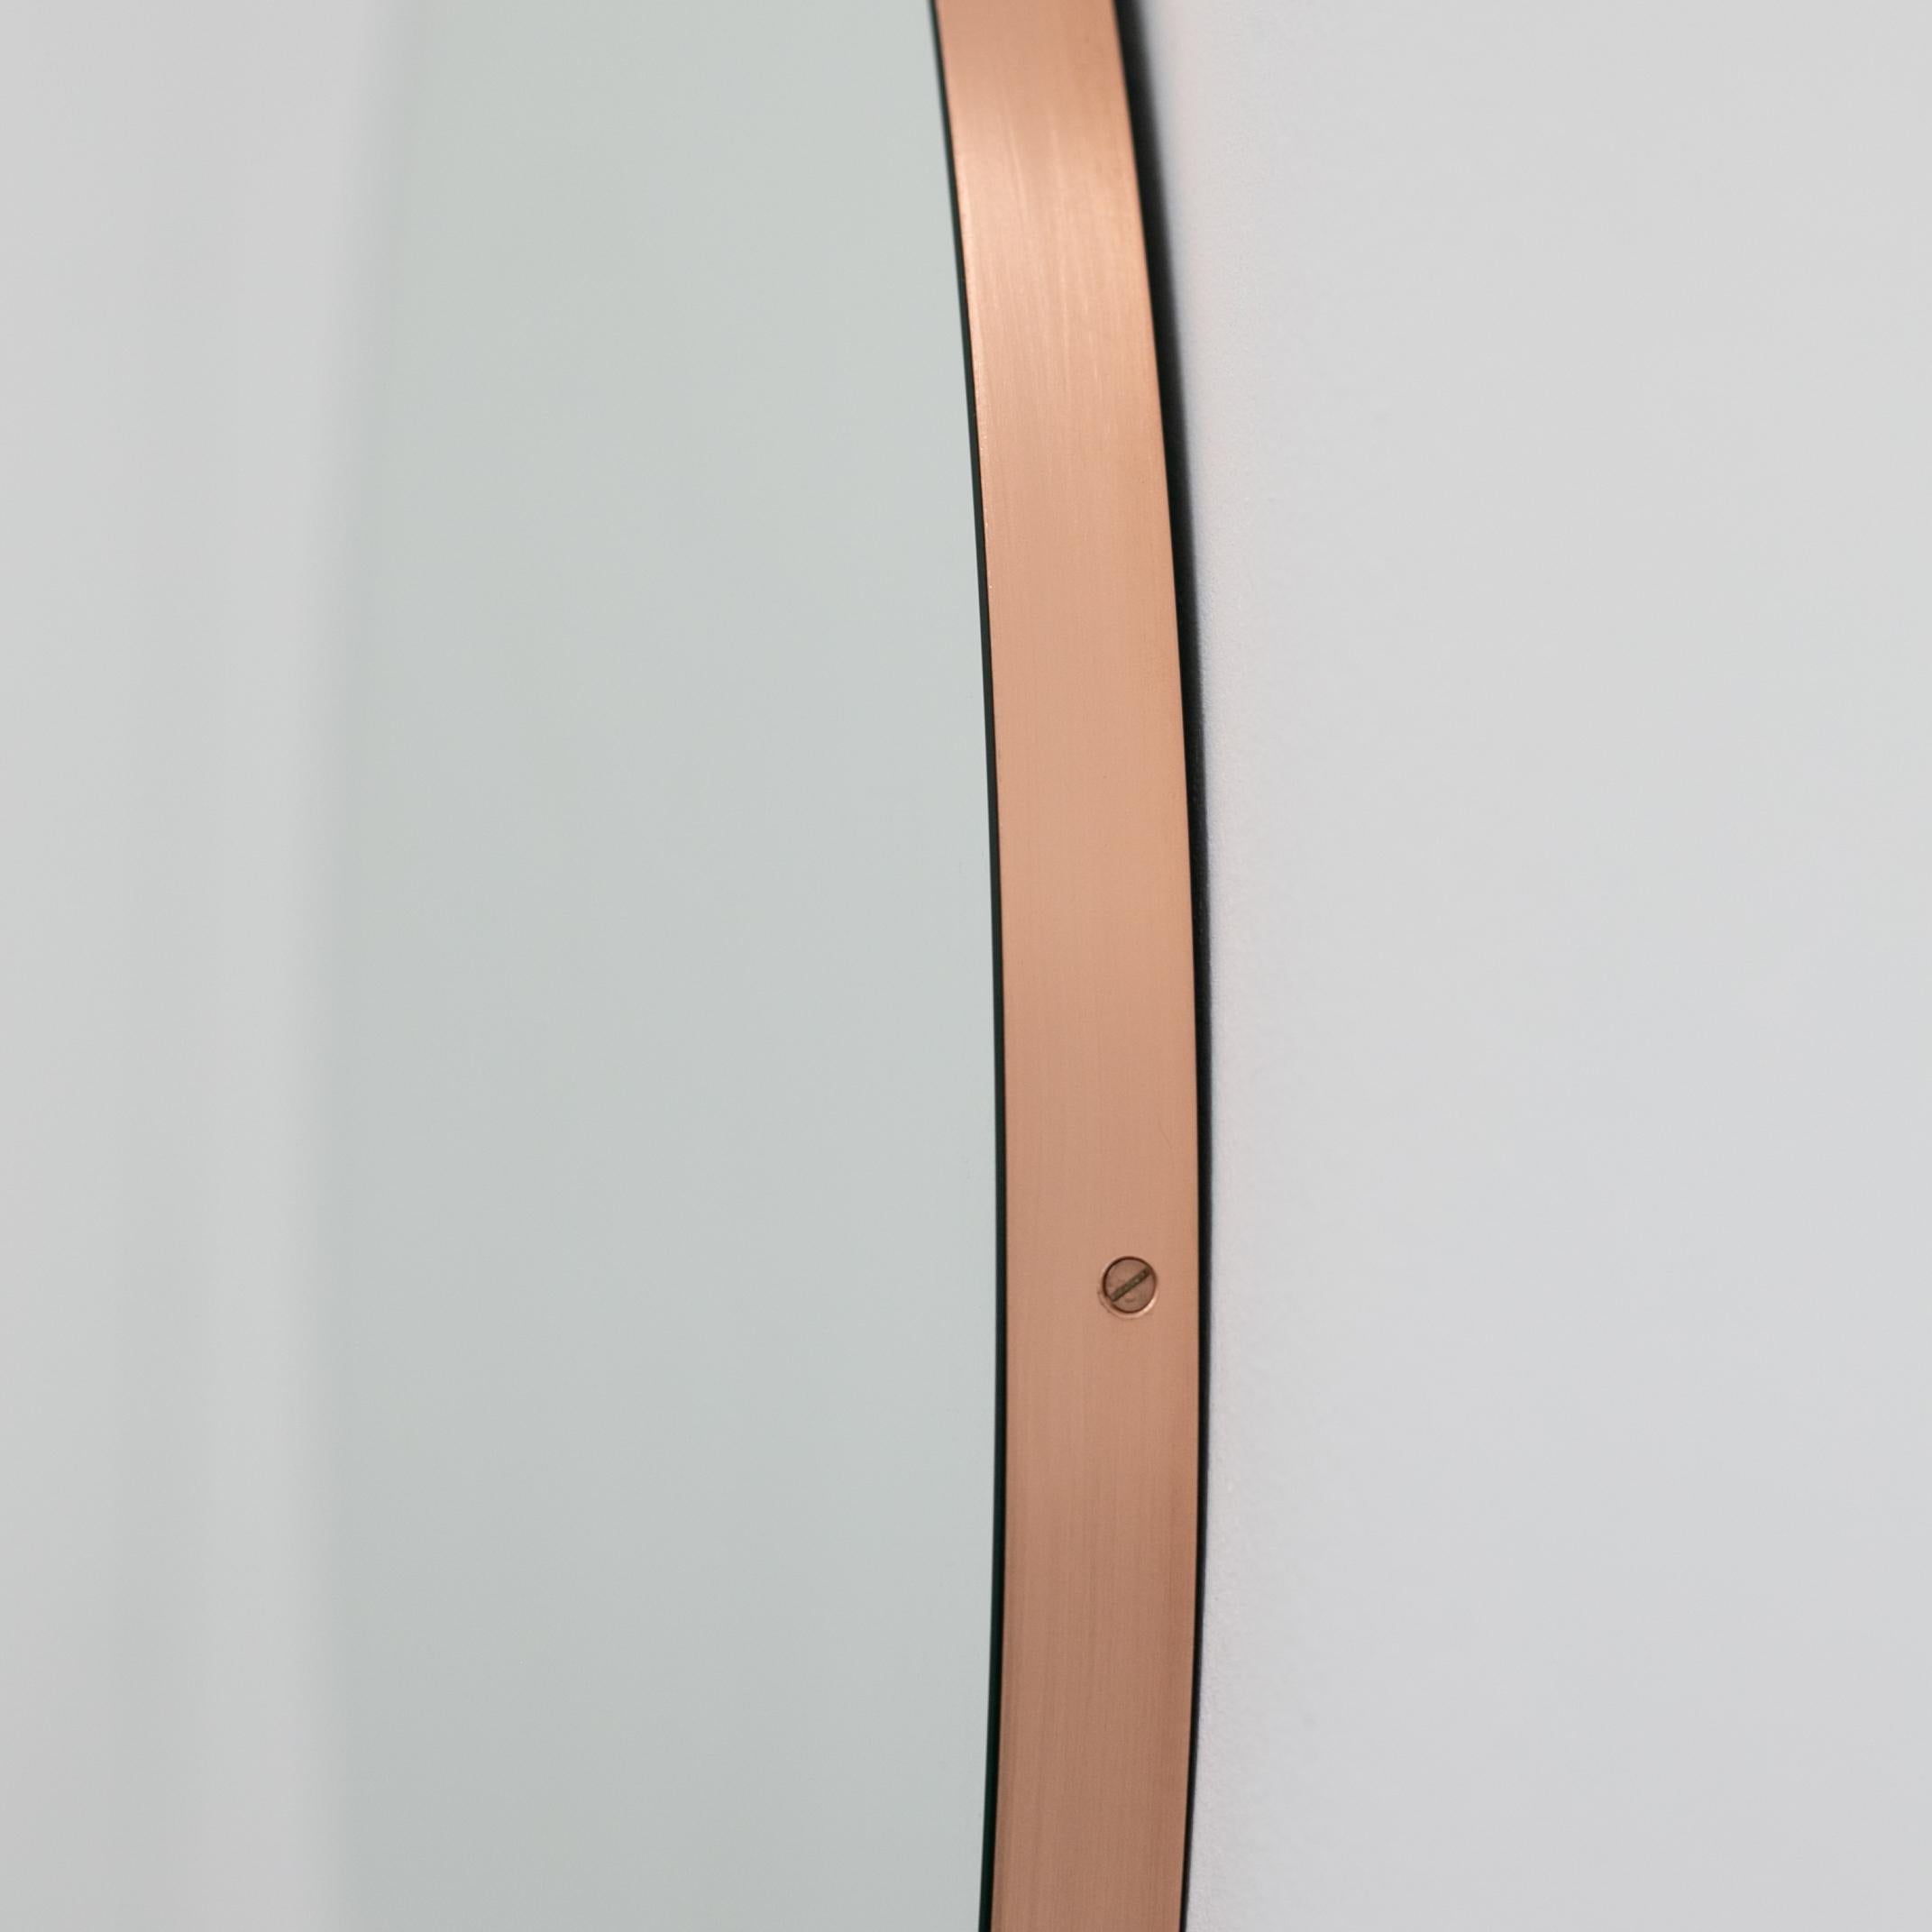 Brushed Orbis Round Contemporary Mirror with Copper Frame, Regular For Sale